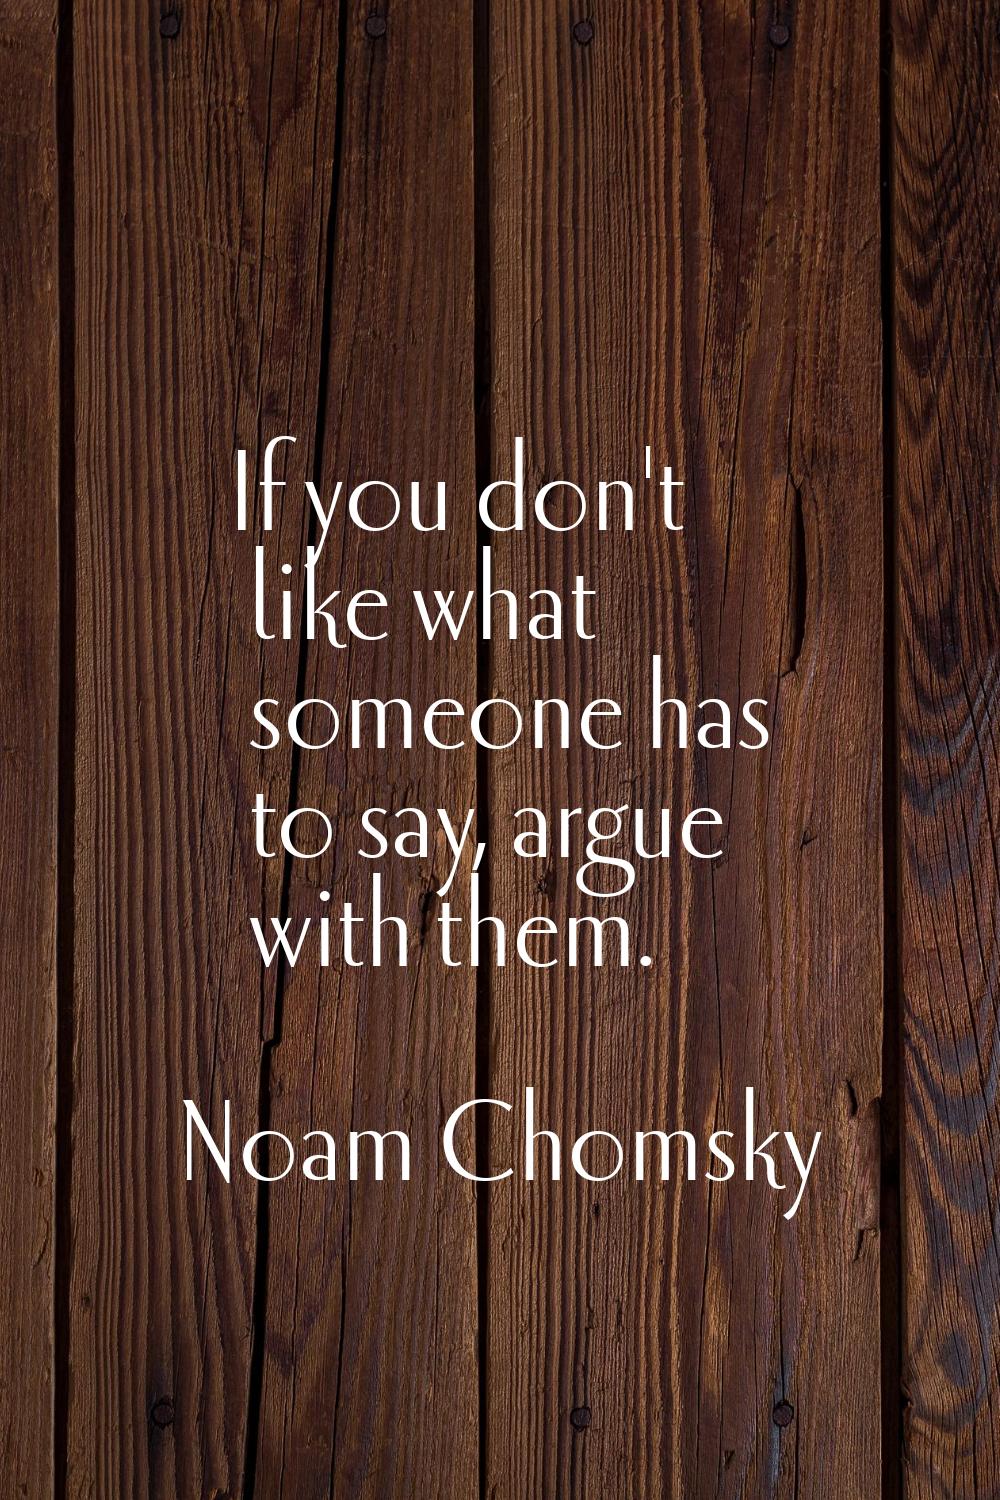 If you don't like what someone has to say, argue with them.